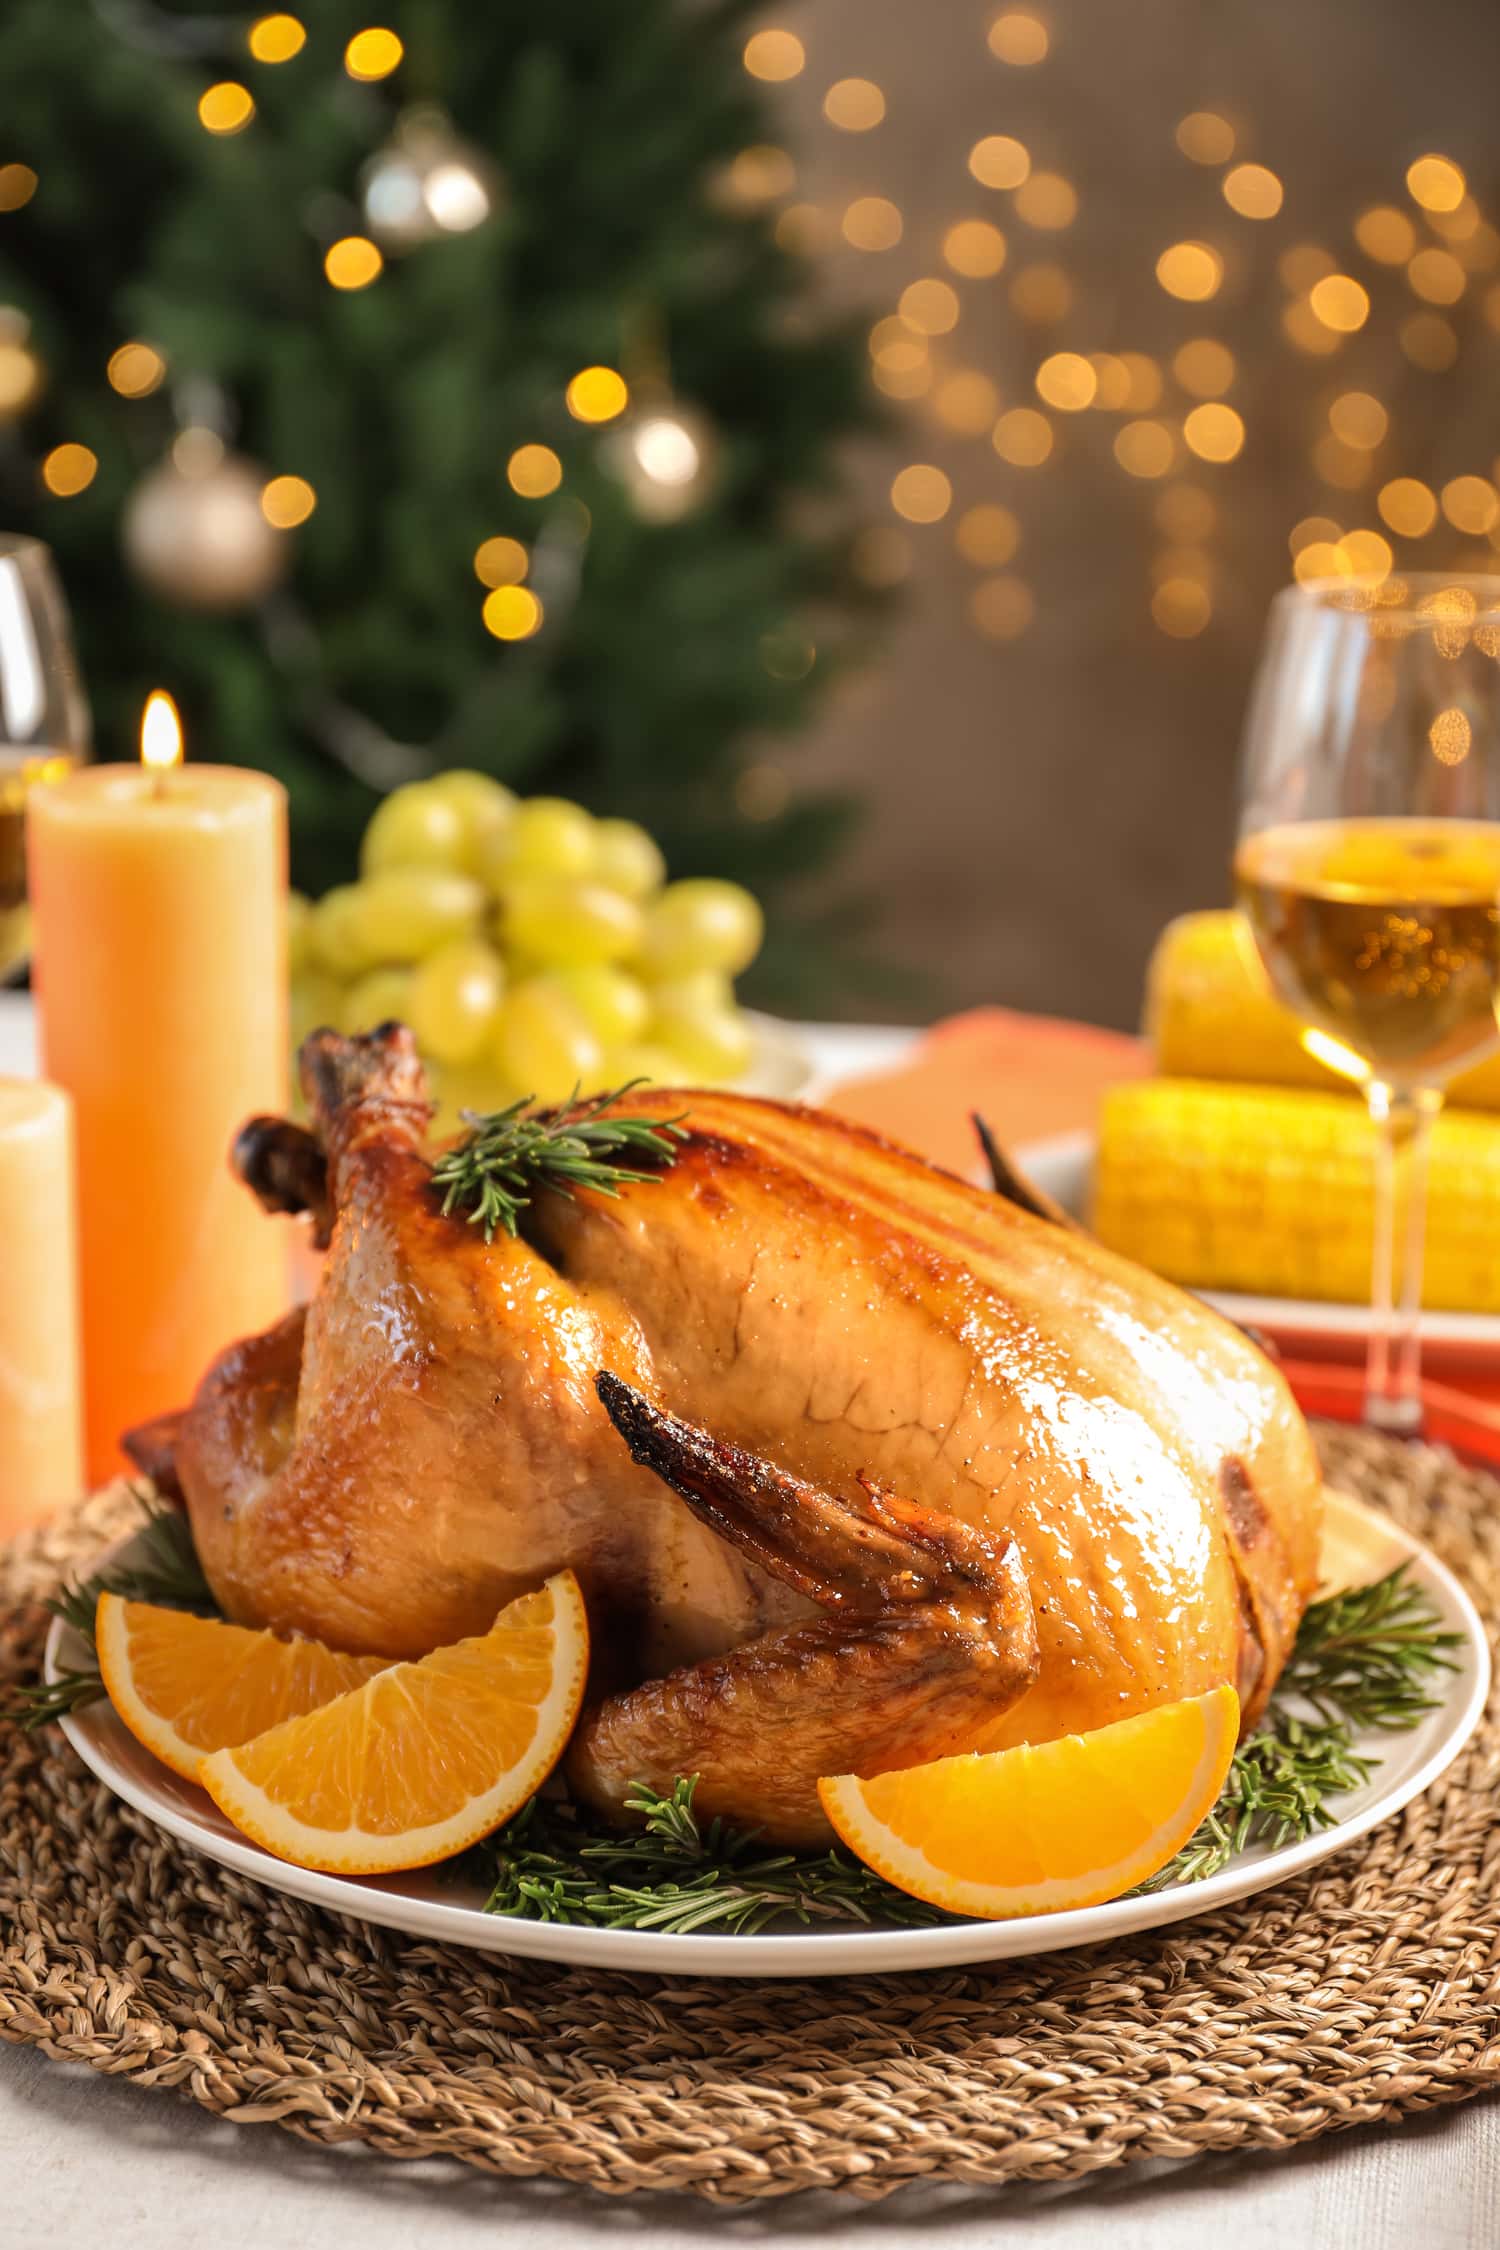 Instant Pot Turkey on a plate with slices oranges on the side and garnish with rosemary